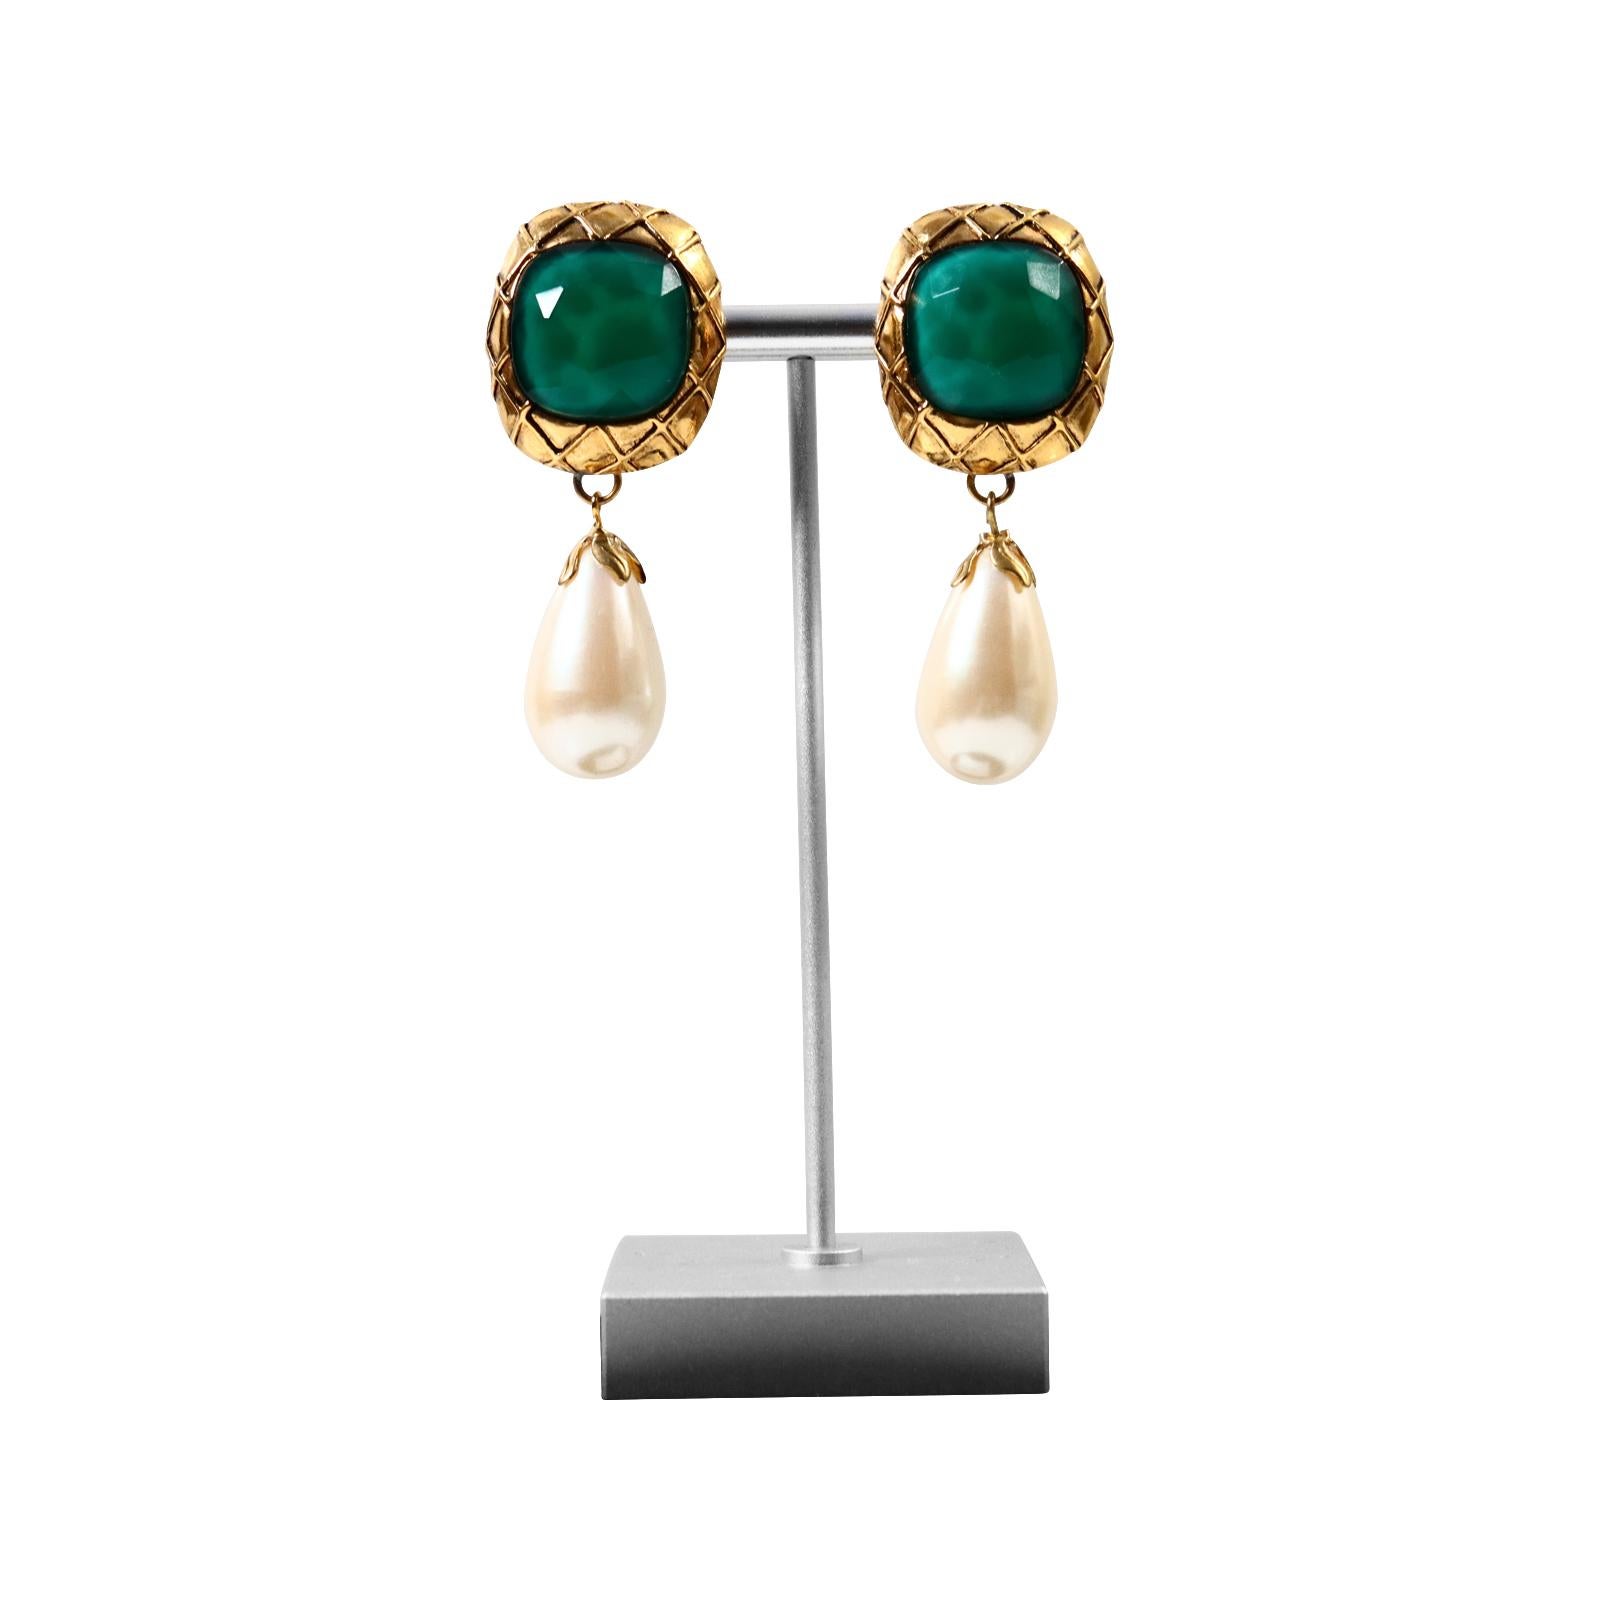 Vintage French Gold with Green and Dangling Faux Peal Earings Circa 1980s For Sale 4